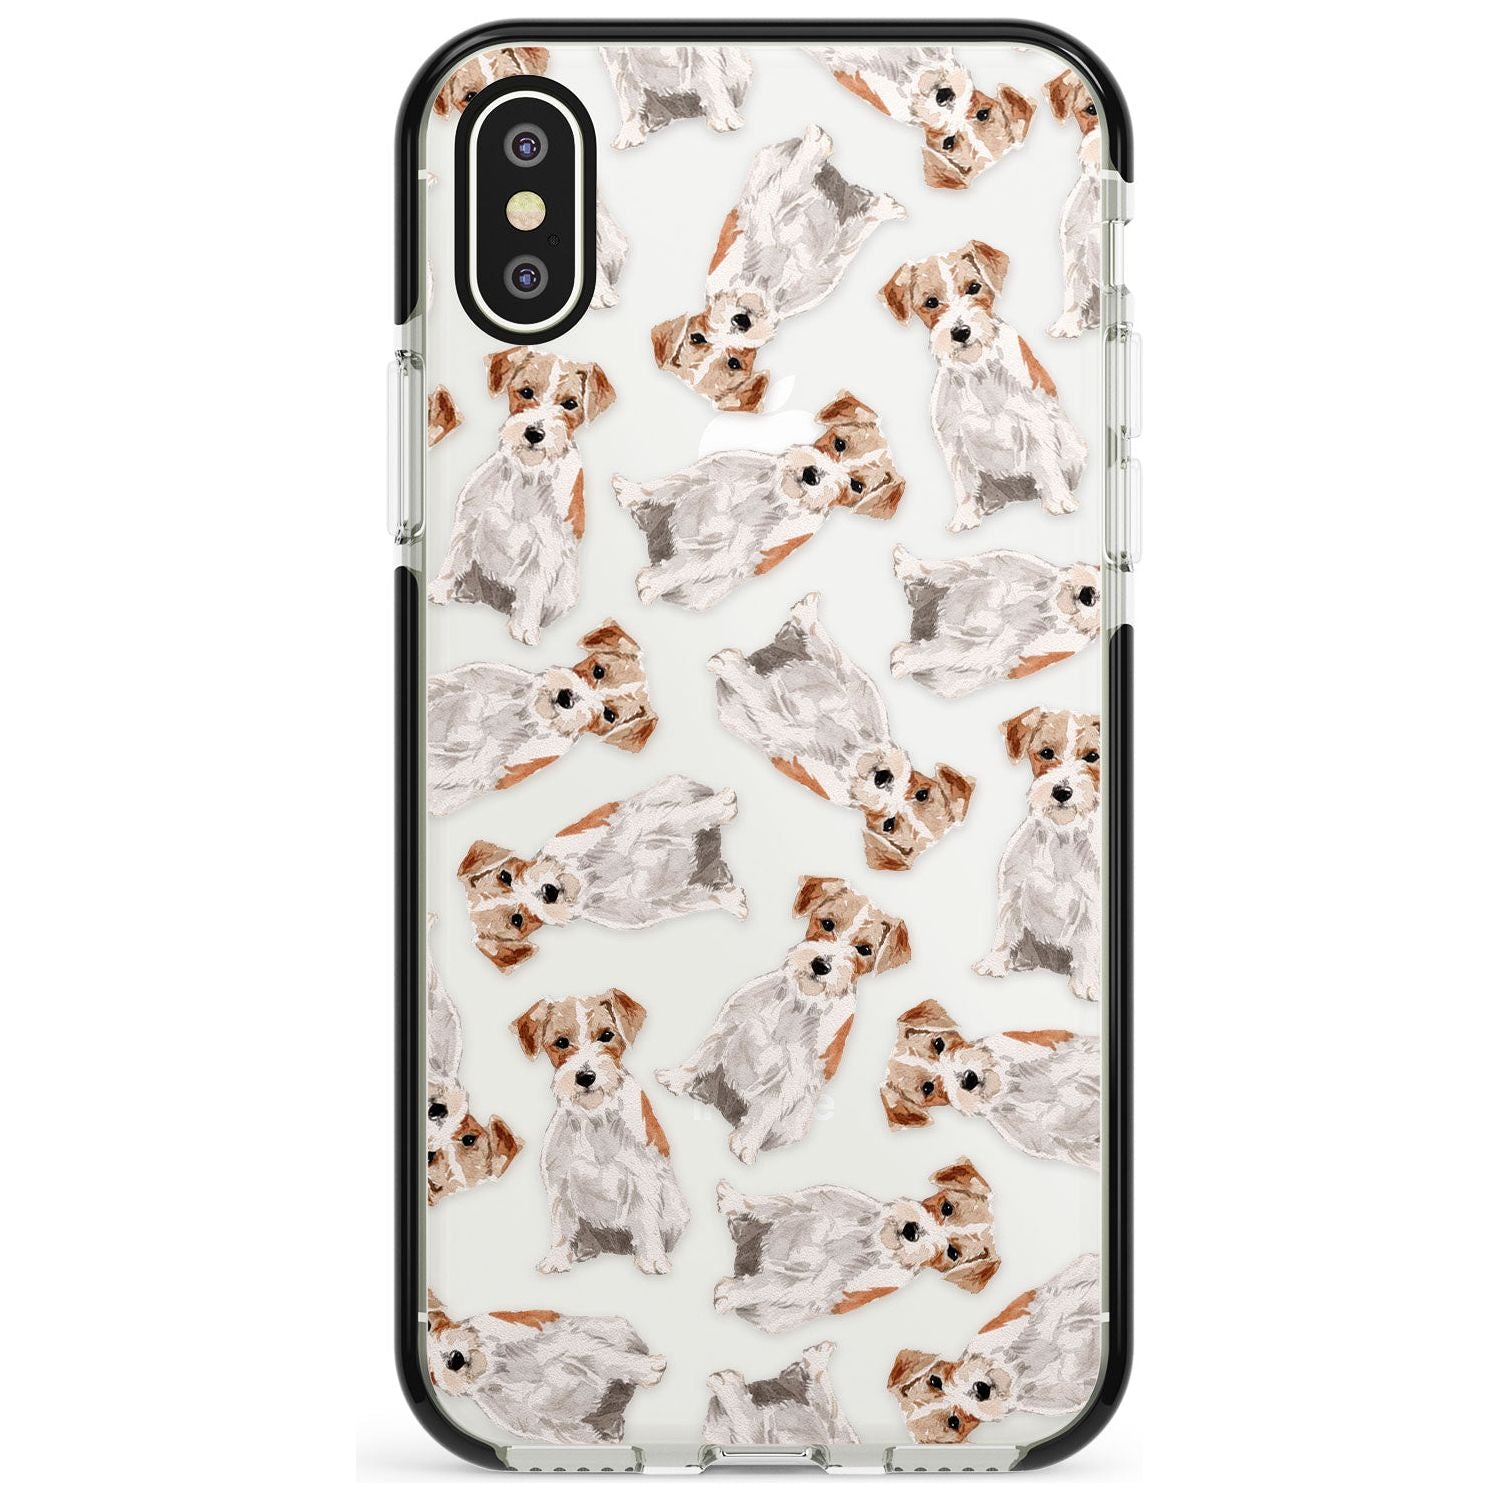 Wirehaired Jack Russell Watercolour Dog Pattern Black Impact Phone Case for iPhone X XS Max XR